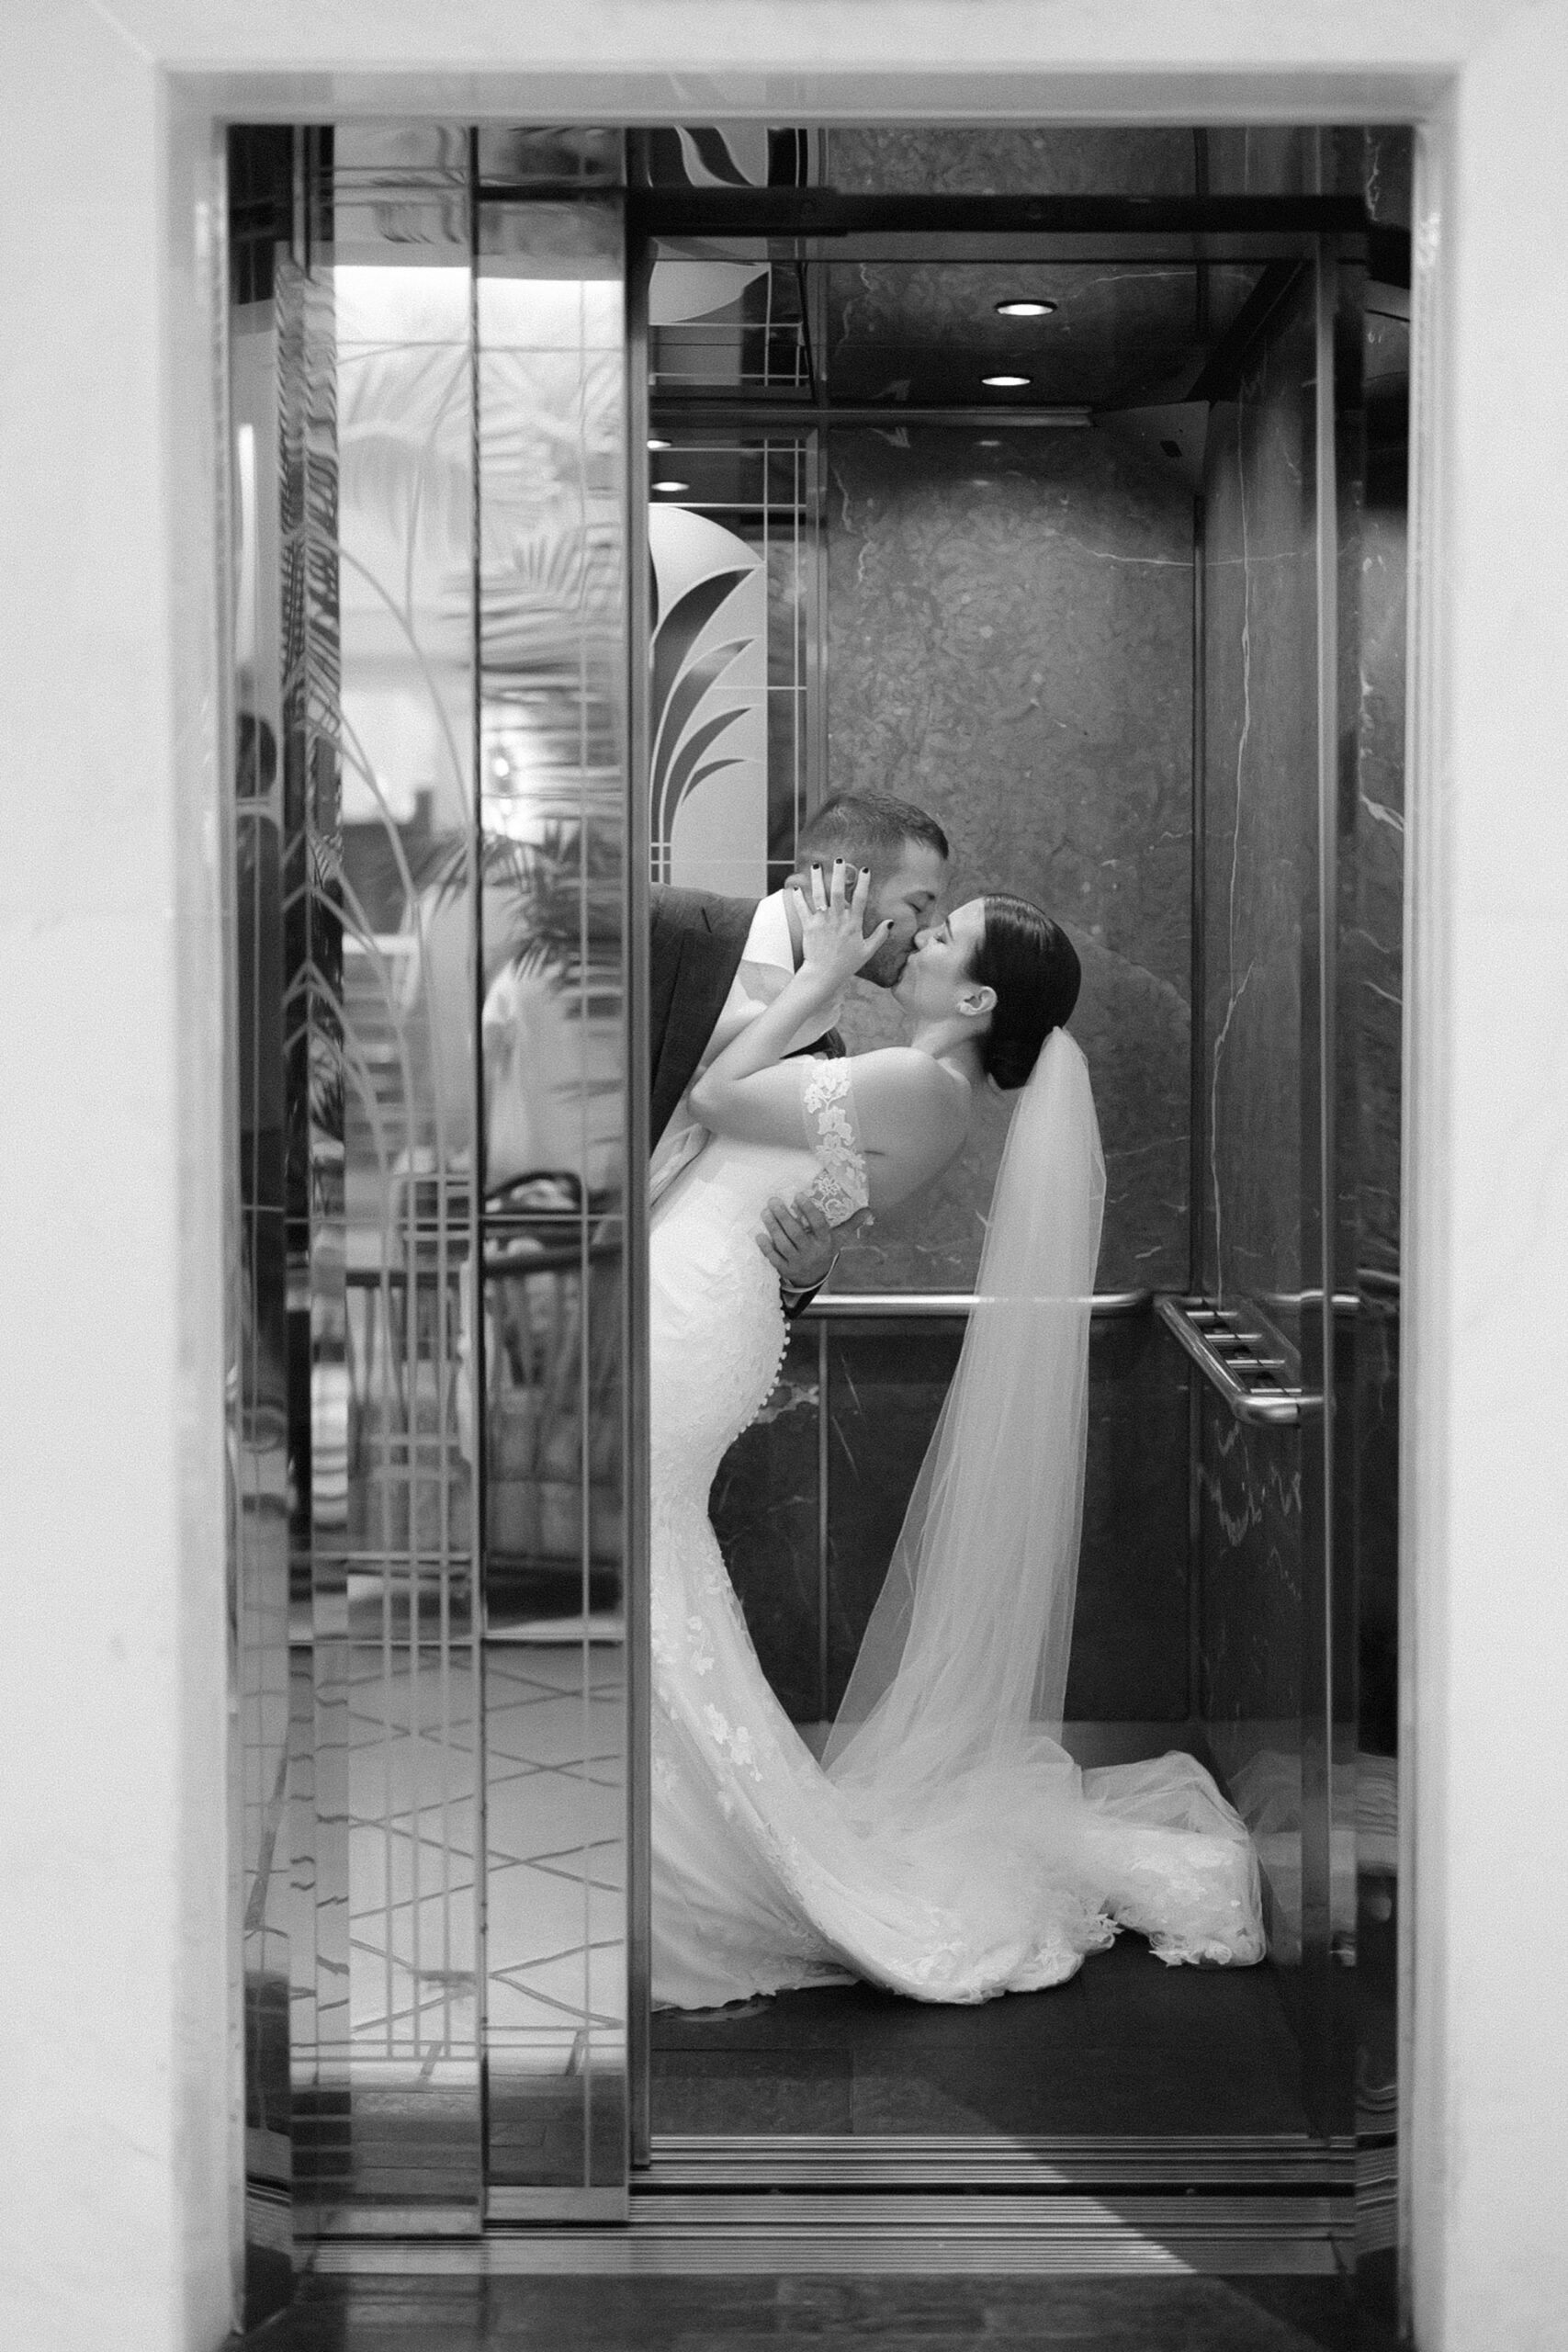 romantic black and white image of the bride and groom kissing in the elevator before it closes